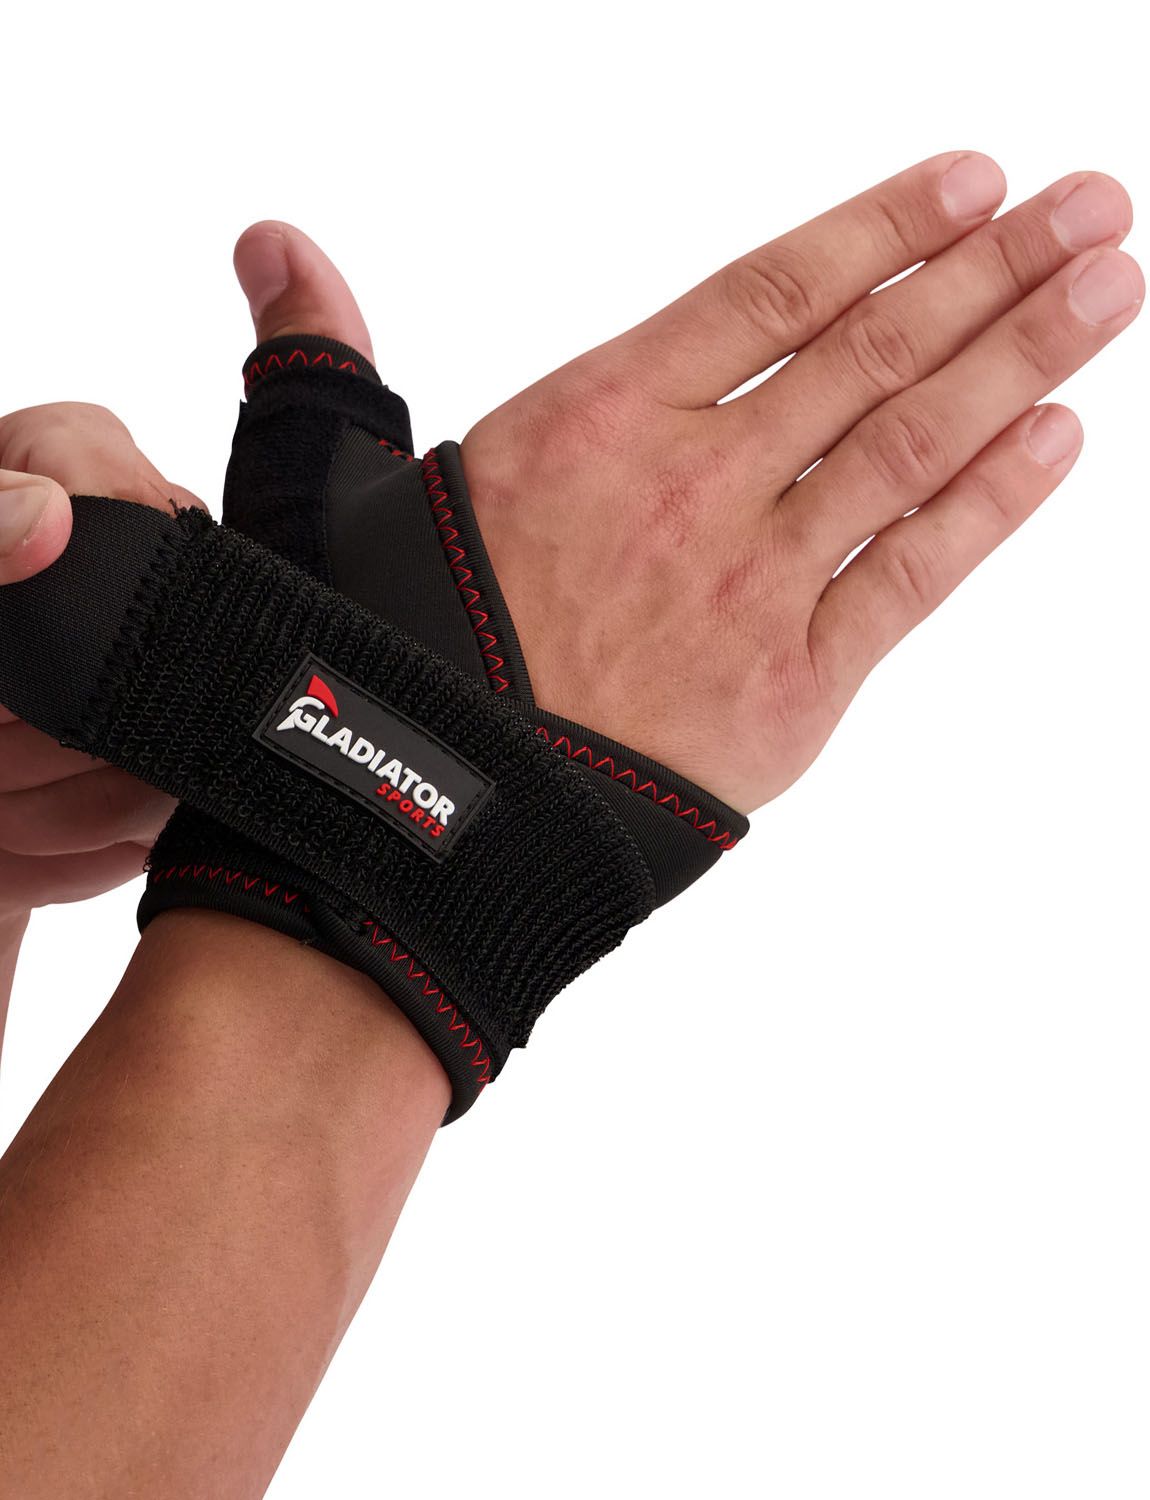 gladiator sports thumb wrist support for sale